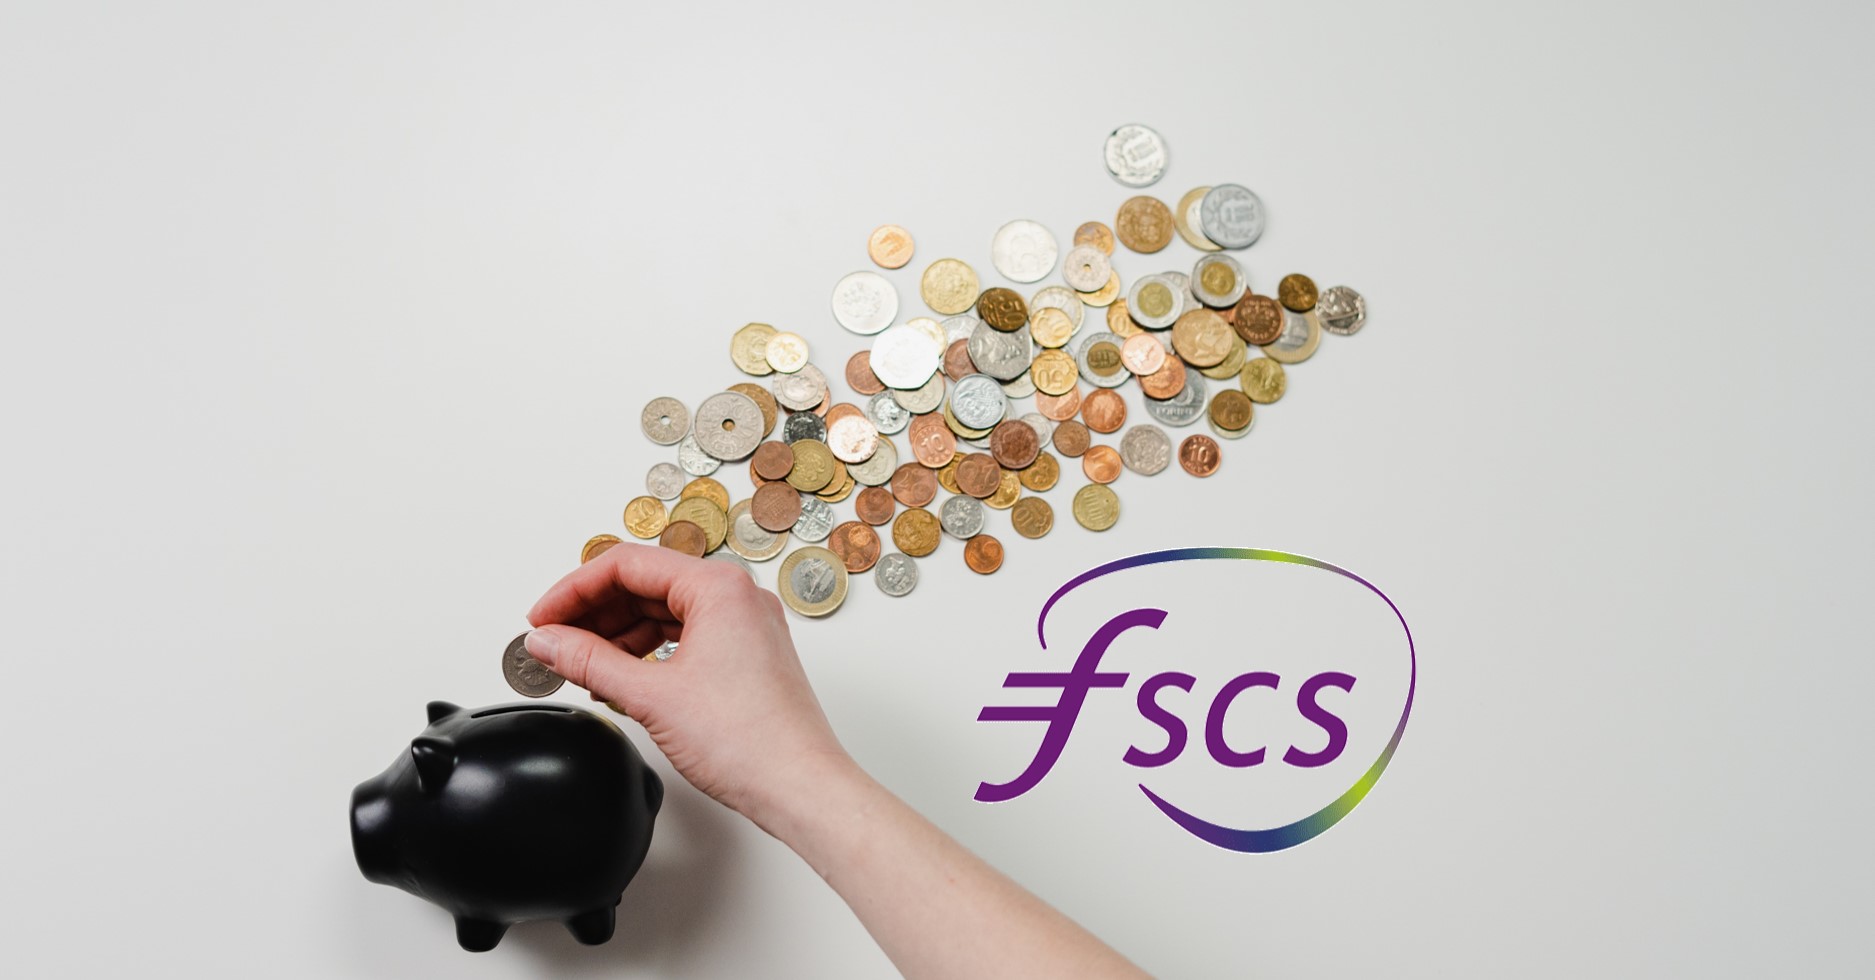 Two-thirds of finance advice executives do not trust FSCS